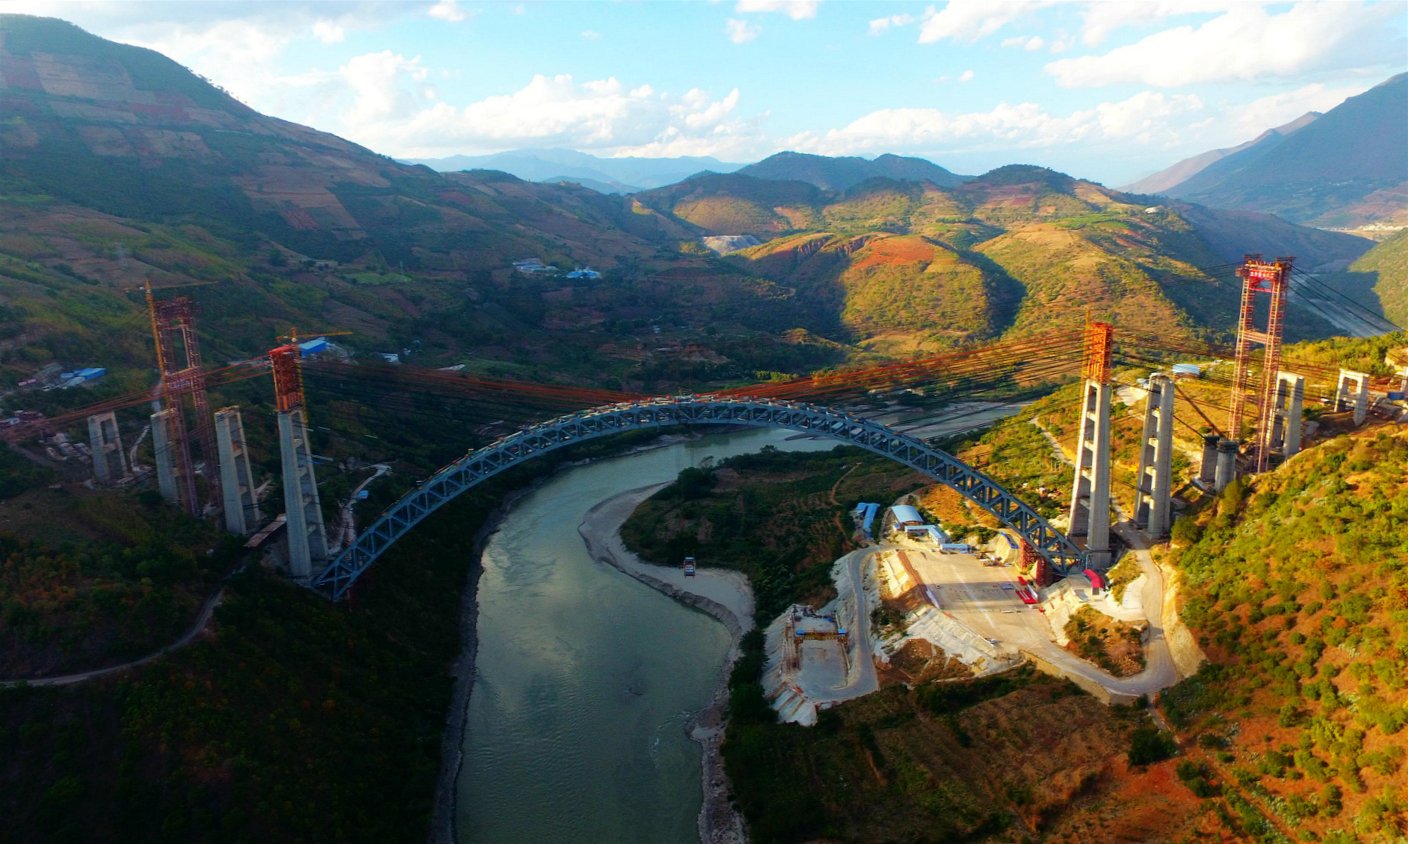 <p>Railway bridge across the Nujiang river in China’s Yunnan province. This is a key section of the China-Myanmar railway project to link Yunnan and Yangon [image from: Alamy]</p>